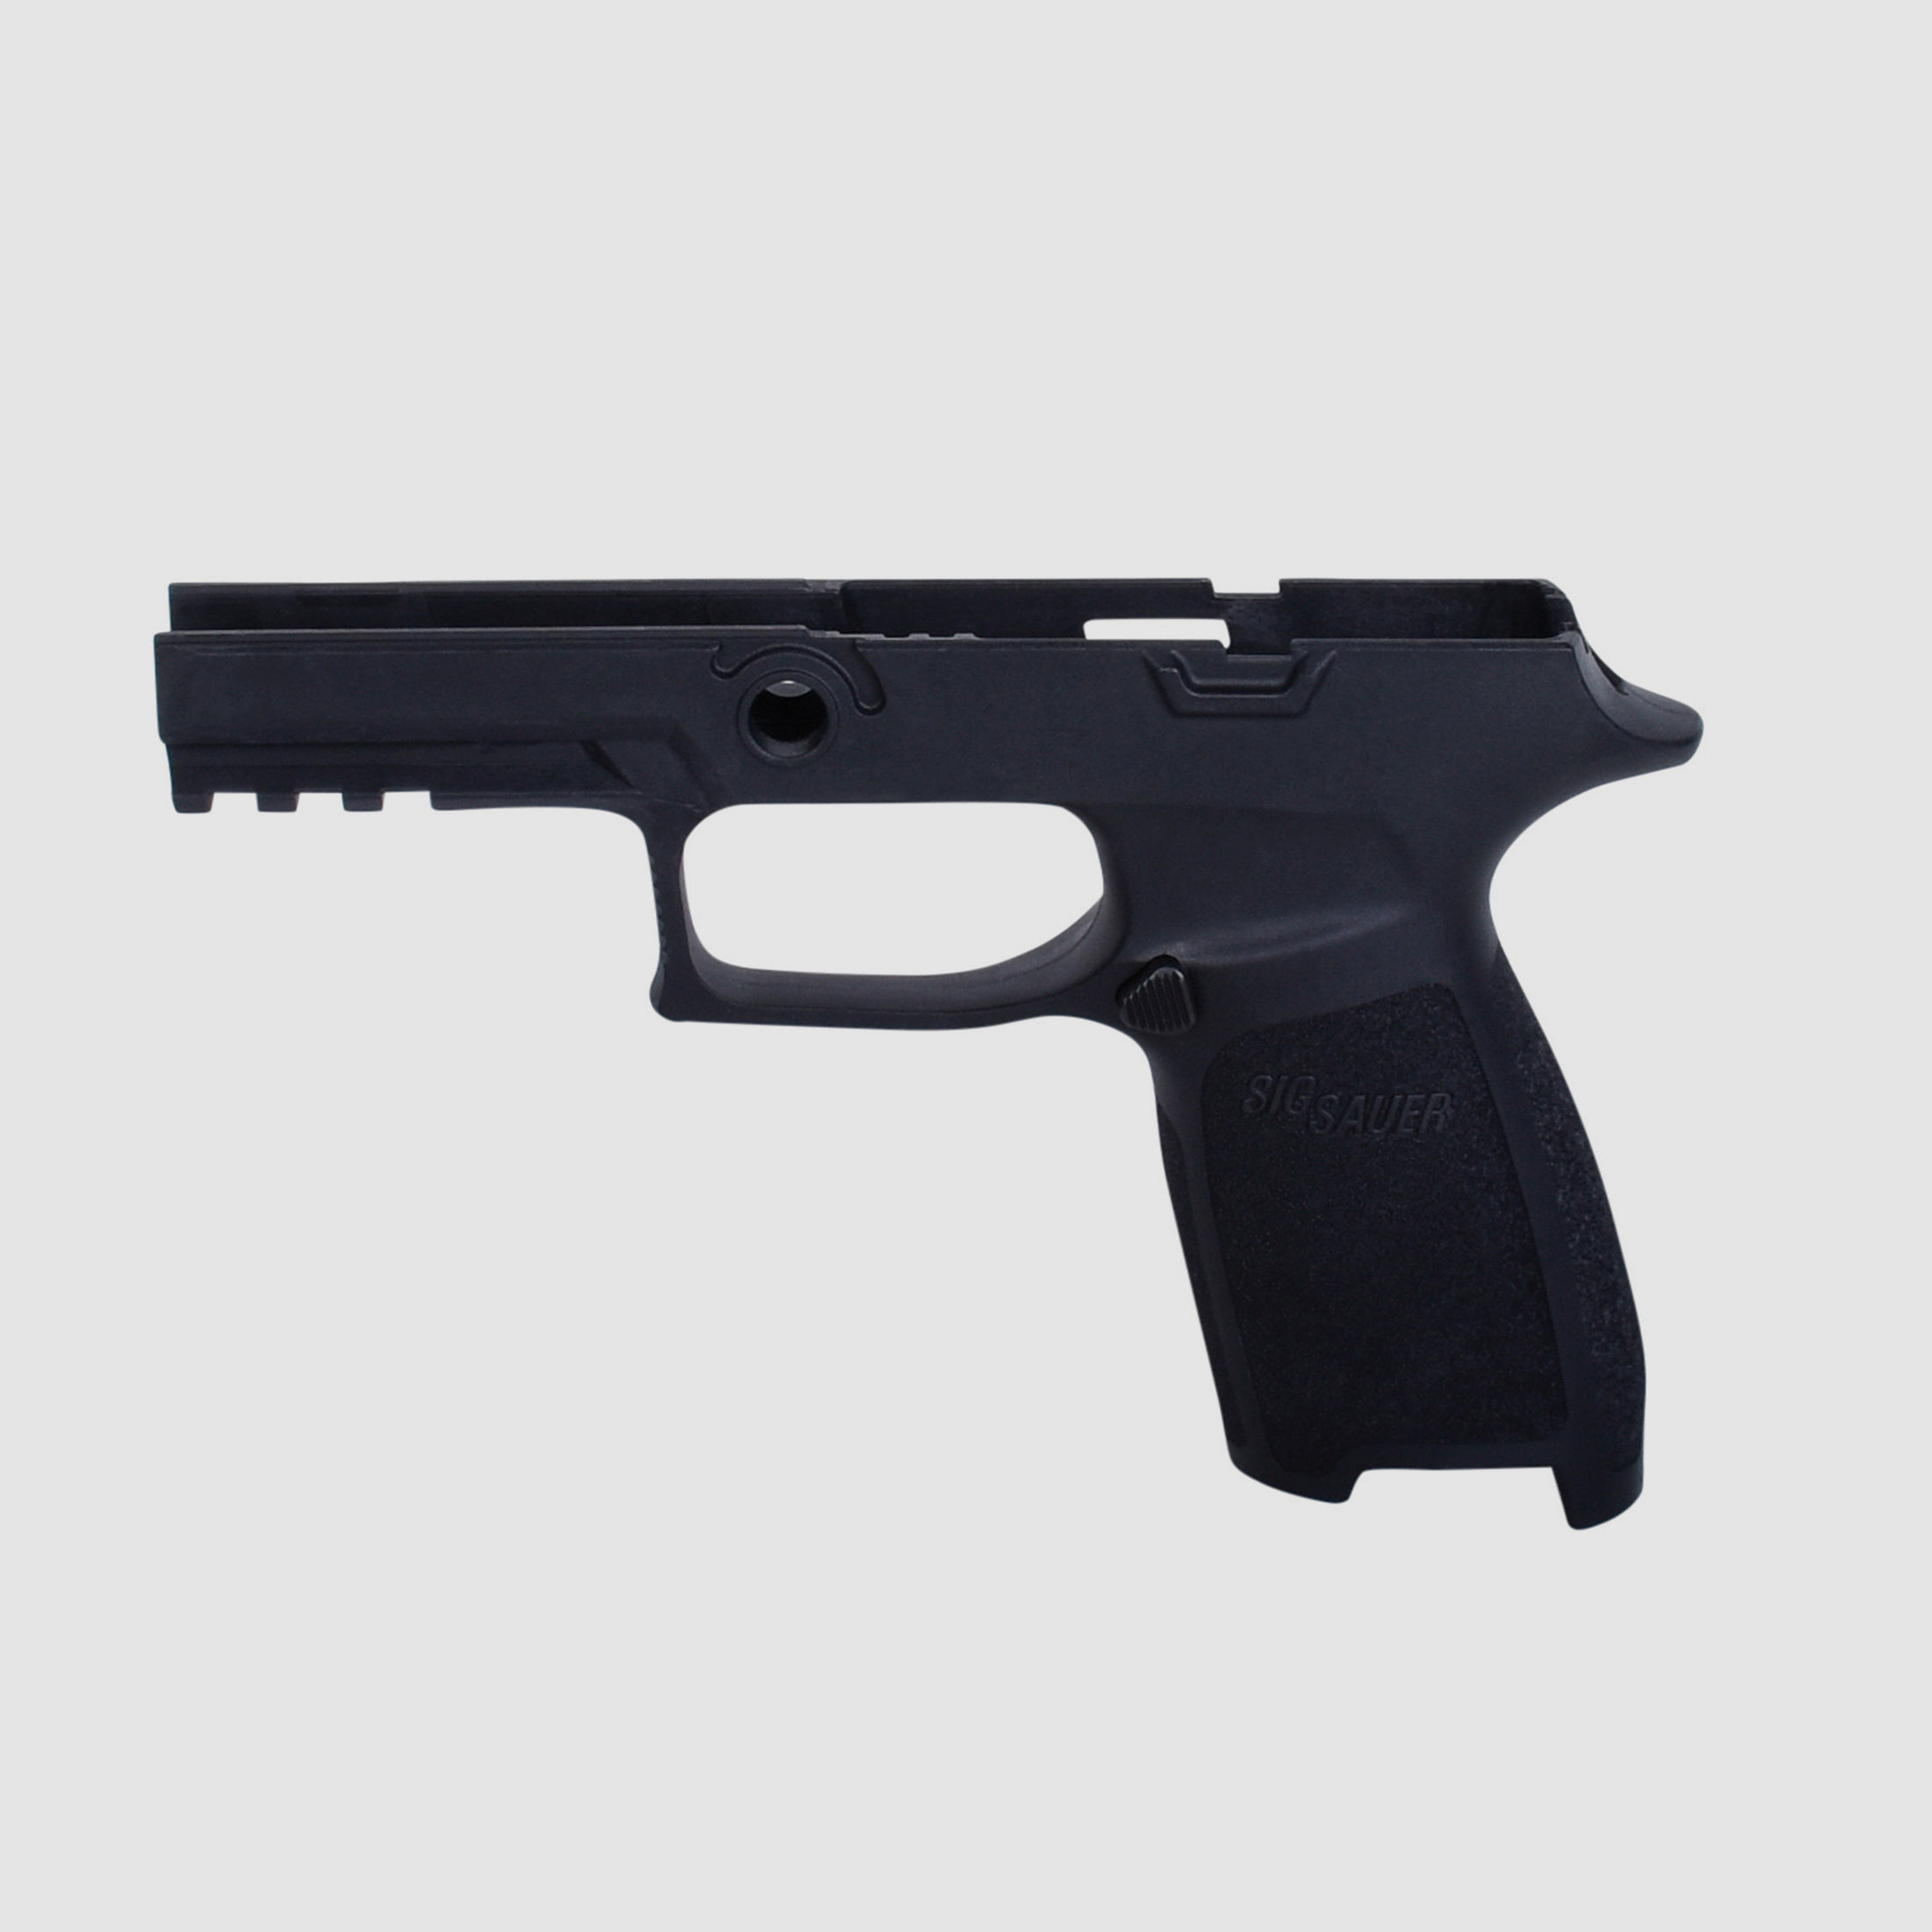 Griffmodul Sig Sauer P320 / P250 Carry Small | .357SIG / 9mm / .40S&W